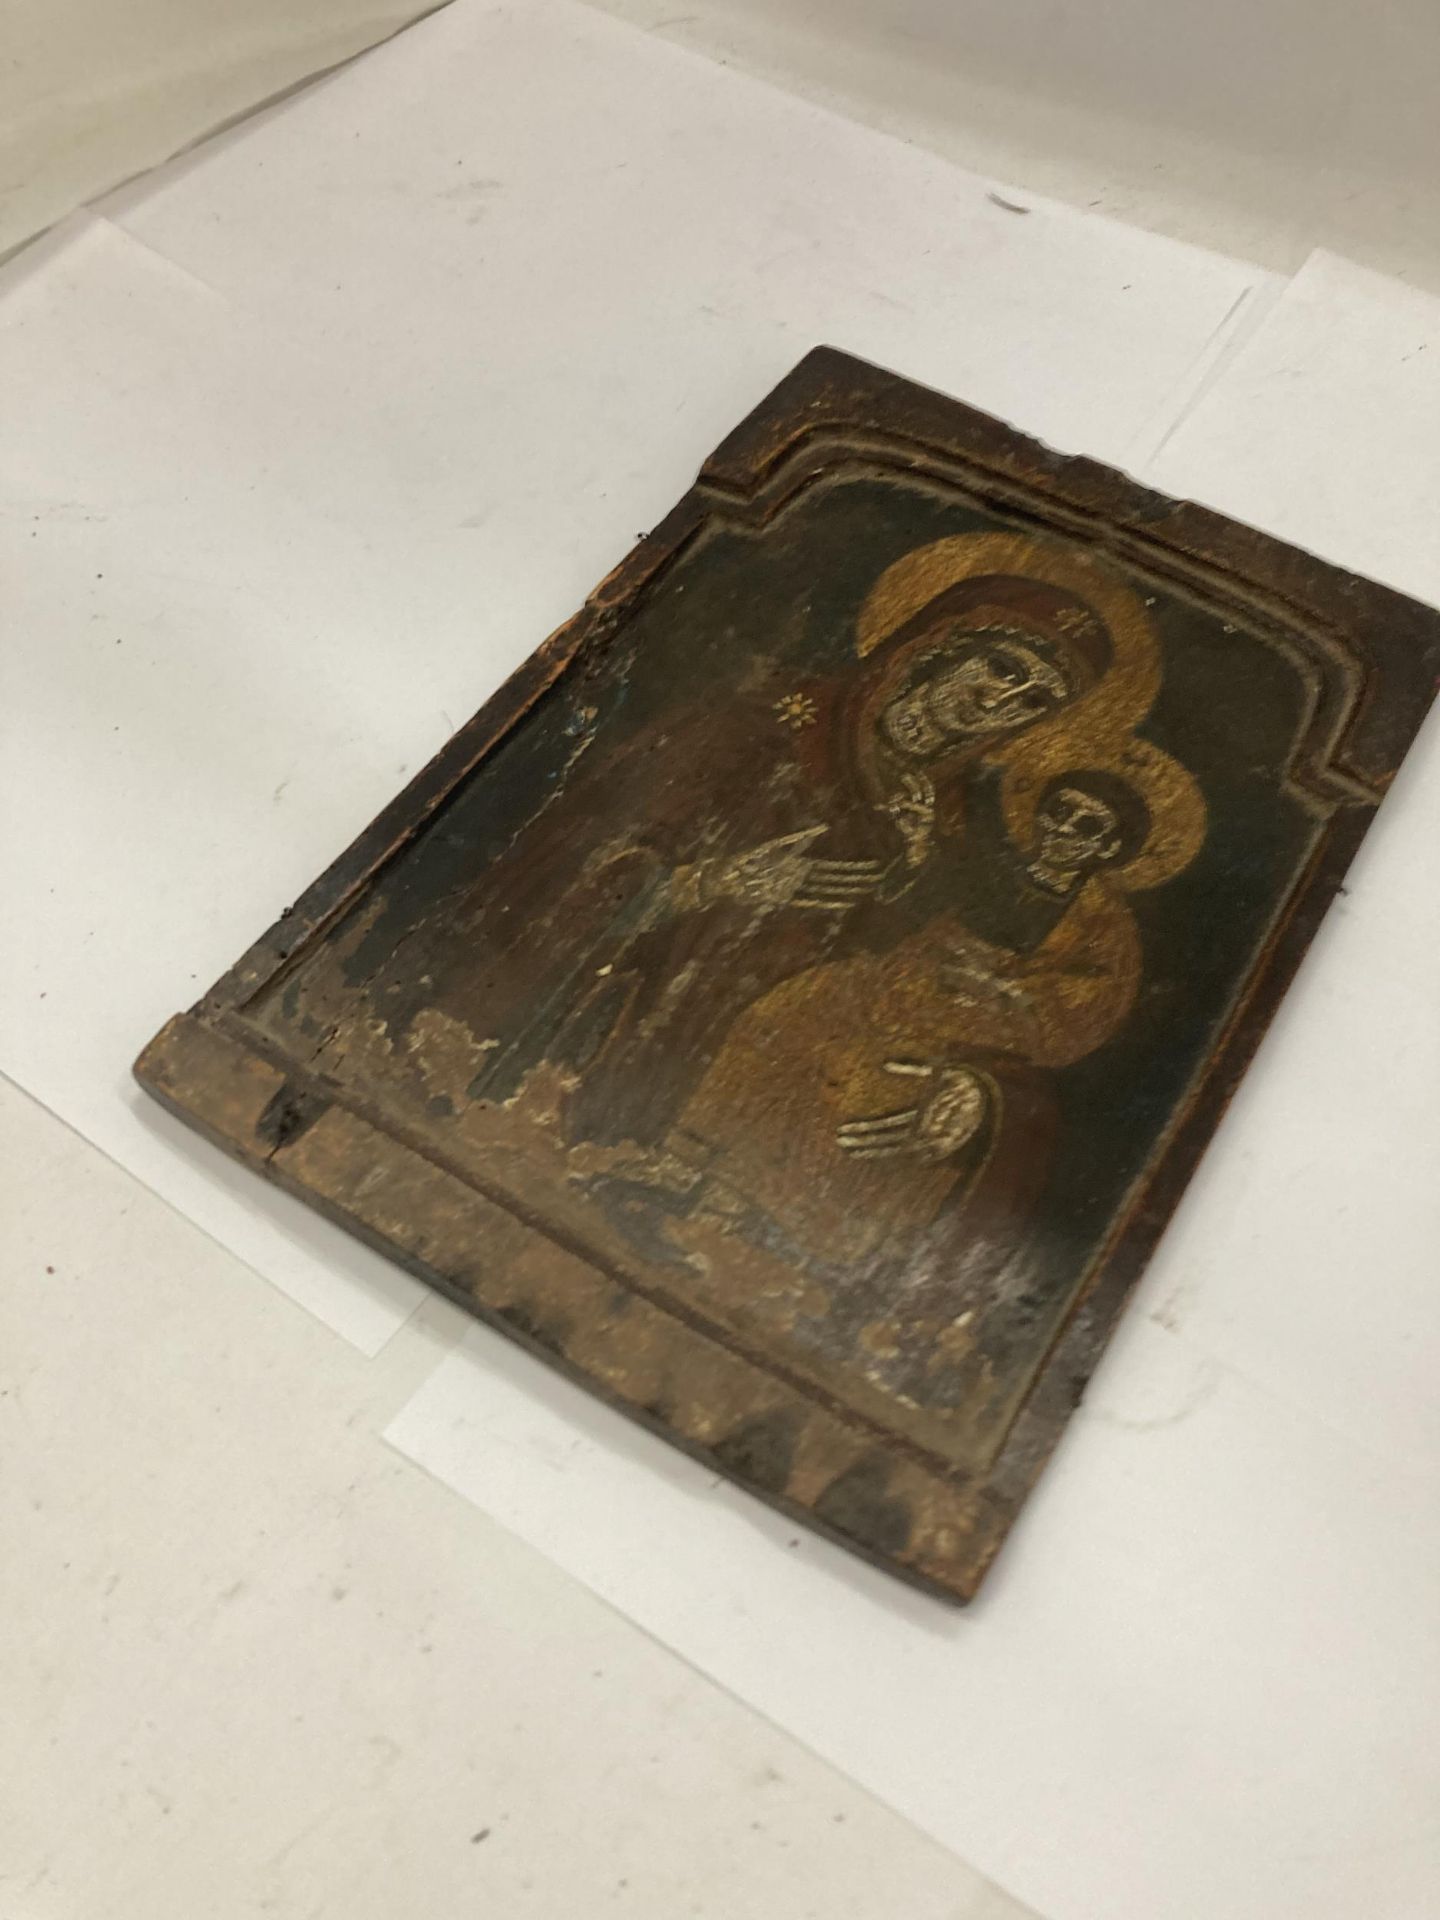 A 19TH CENTURY HAND PAINTED ICON OF THE MADONNA AND CHILD - Image 3 of 4